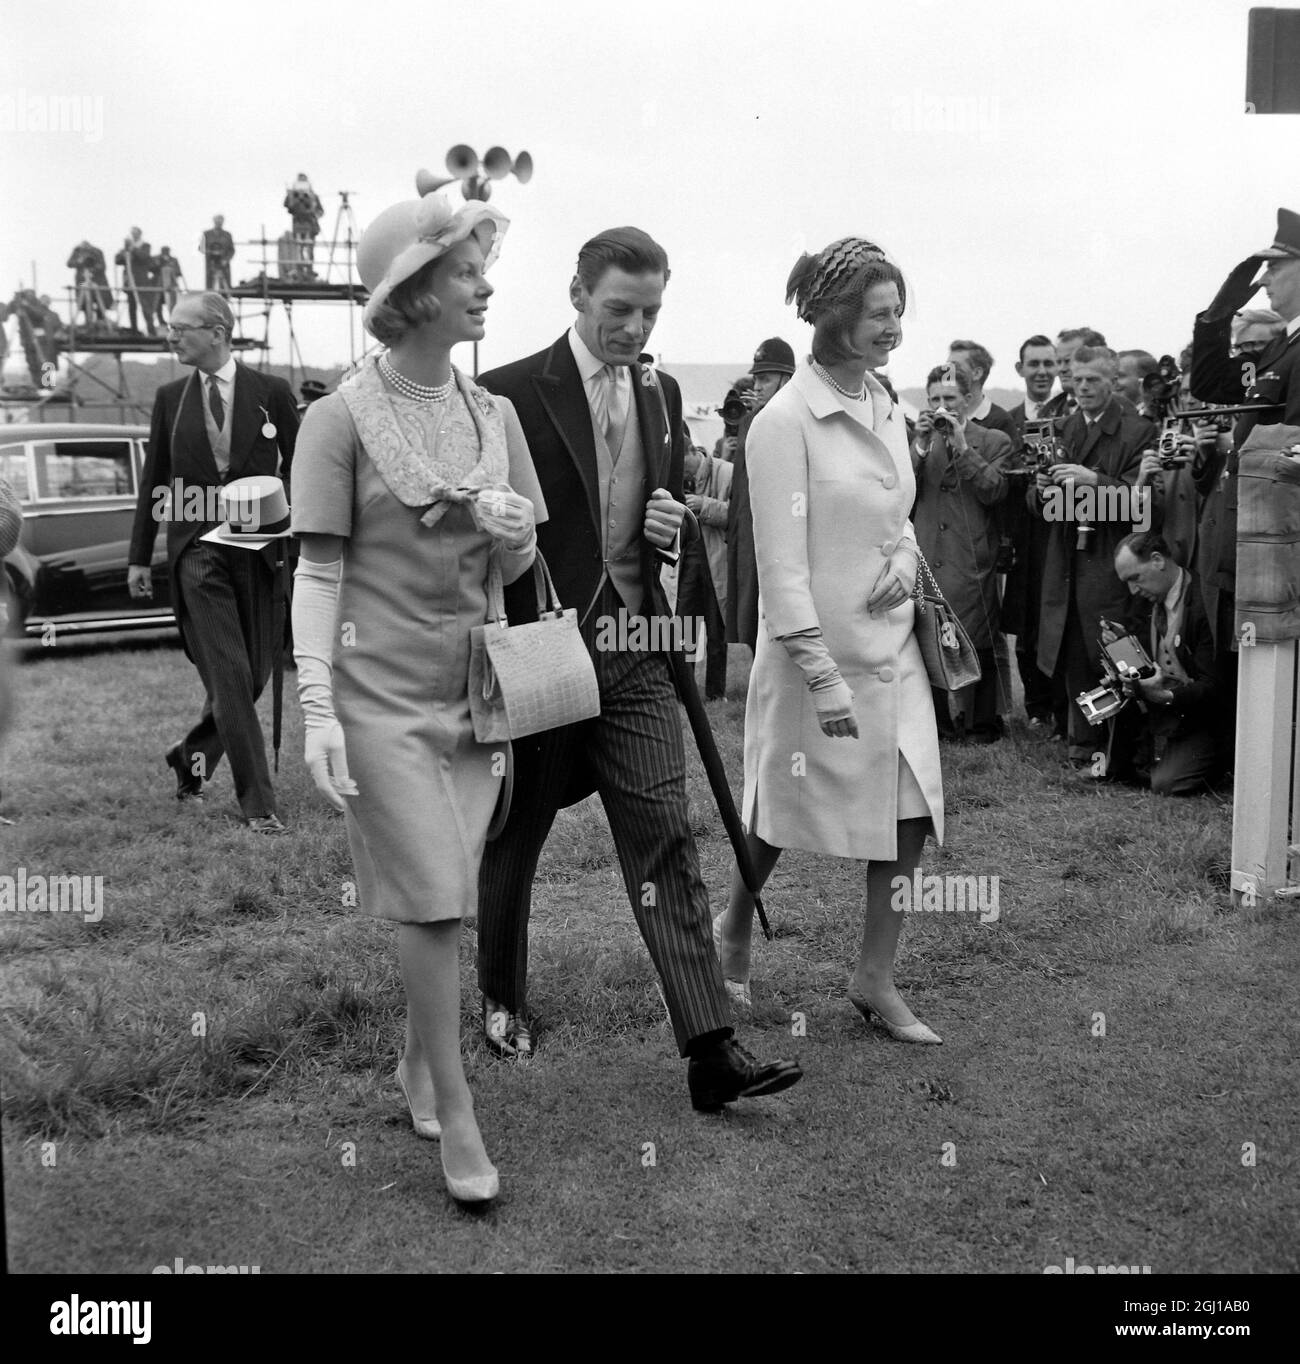 HORSE RACING IN EPSOM PRINCESS ALEXANDRA, ANGUS OGILVY ARRIVE WITH THE DUCHESS OF KENT ; 3 JUNE 1964 Stock Photo